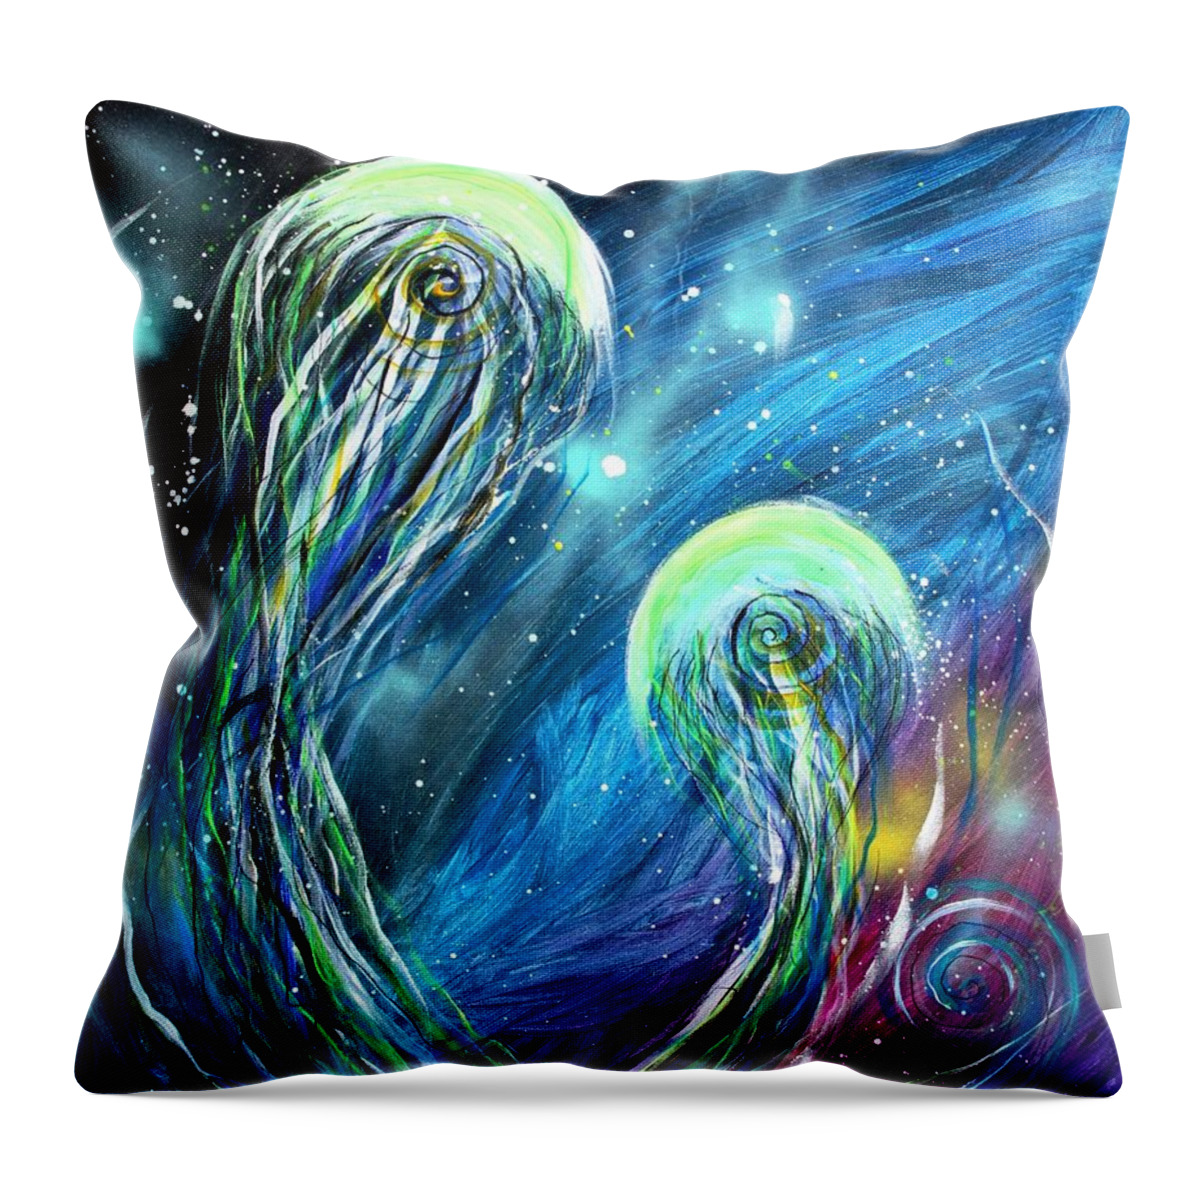 Jellyfish Throw Pillow featuring the painting Two Into by J Vincent Scarpace